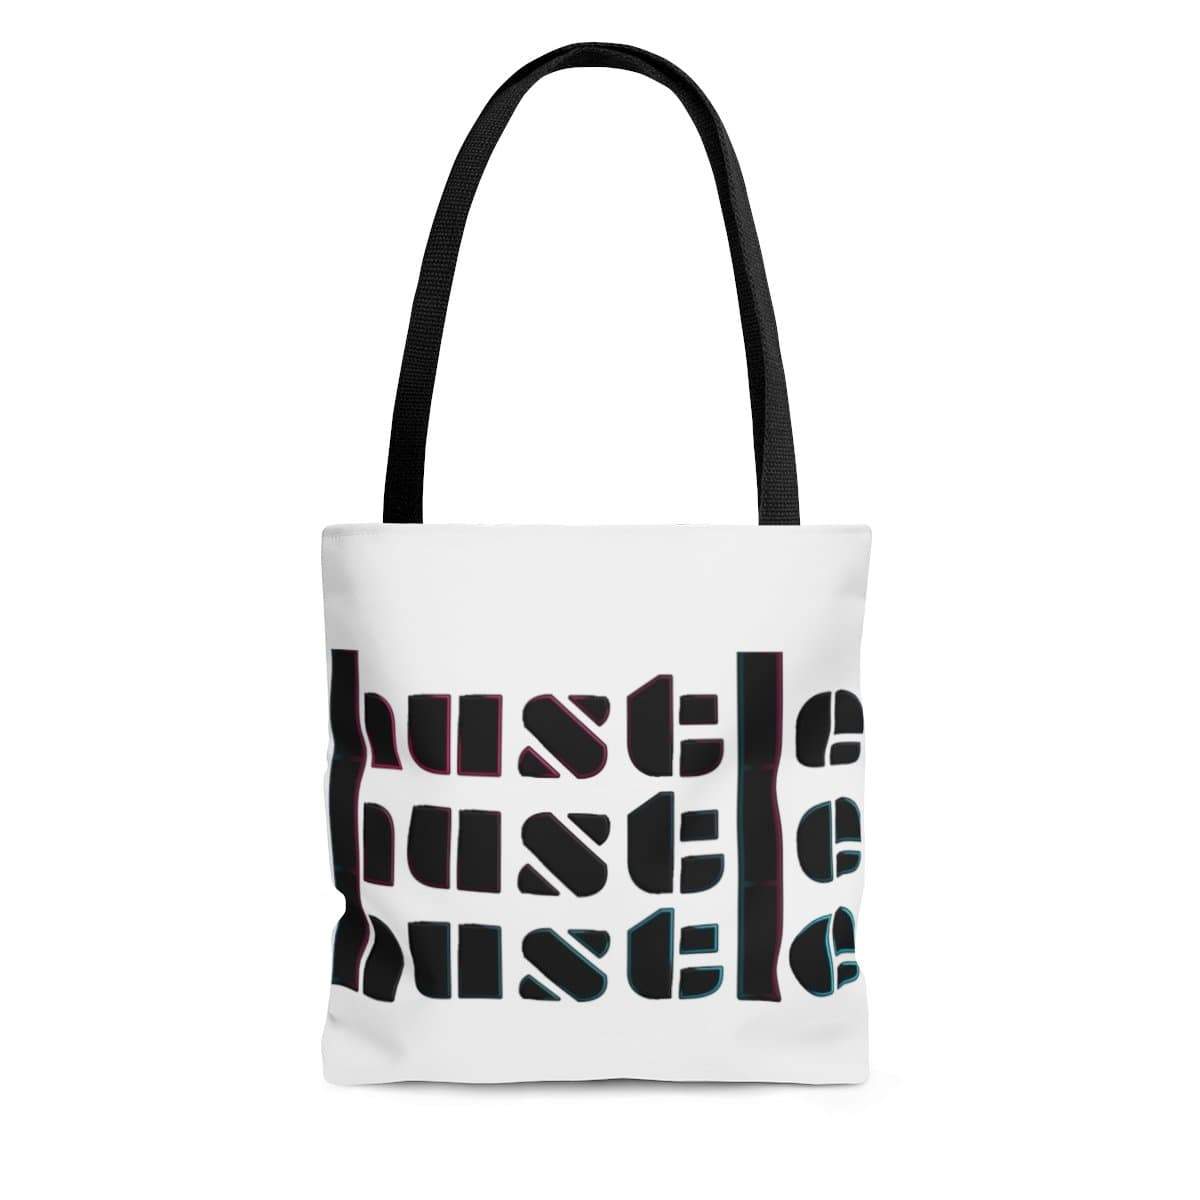 Plumskum Bags Small 3 Times the Hustle Tote Bag